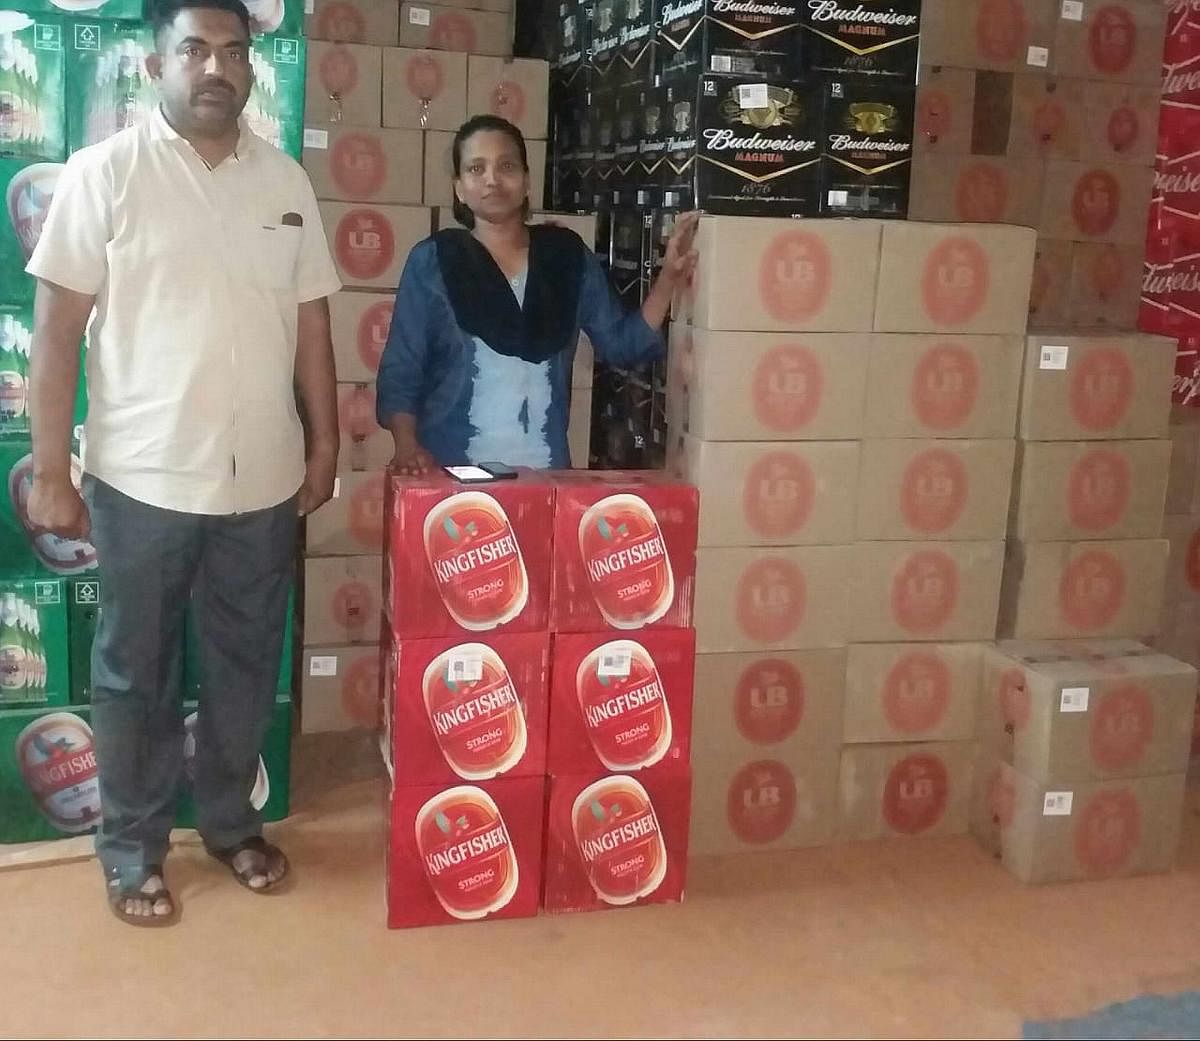 The excise officials seized beer cases worth Rs 14.80 lakh from a warehouse of Karnataka State Beverages Corporation in Honnavar on Thursday night.